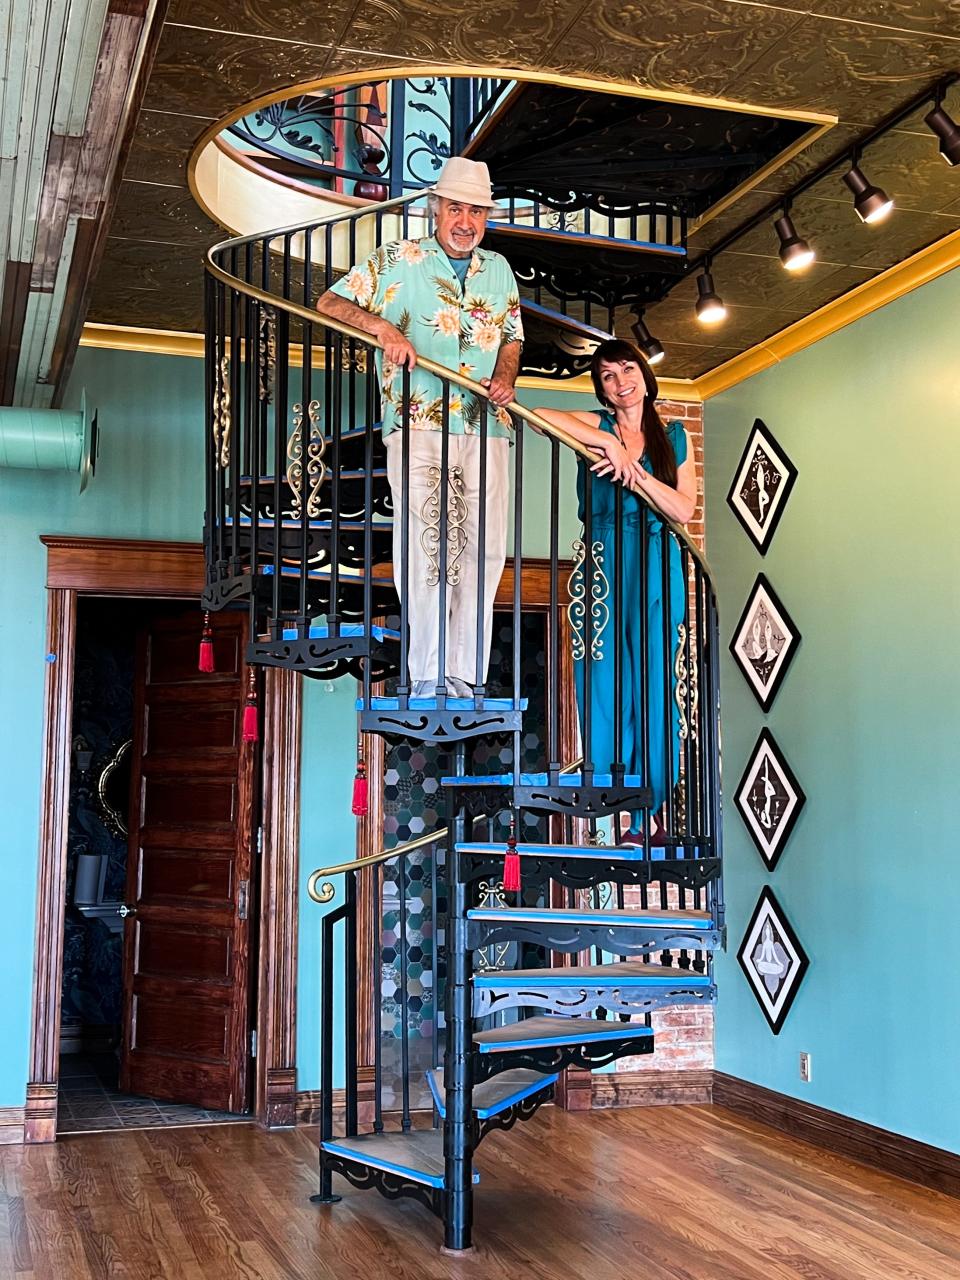 El Paso artist Hal Marcus and his daughter, Leilainia Marcus, stand on a spiral staircase at their venue, Sunset Parlor. Sunset Parlor, 1307 N. Oregon St., is across the road from the Hal Marcus Gallery at 1308 N. Oregon St.